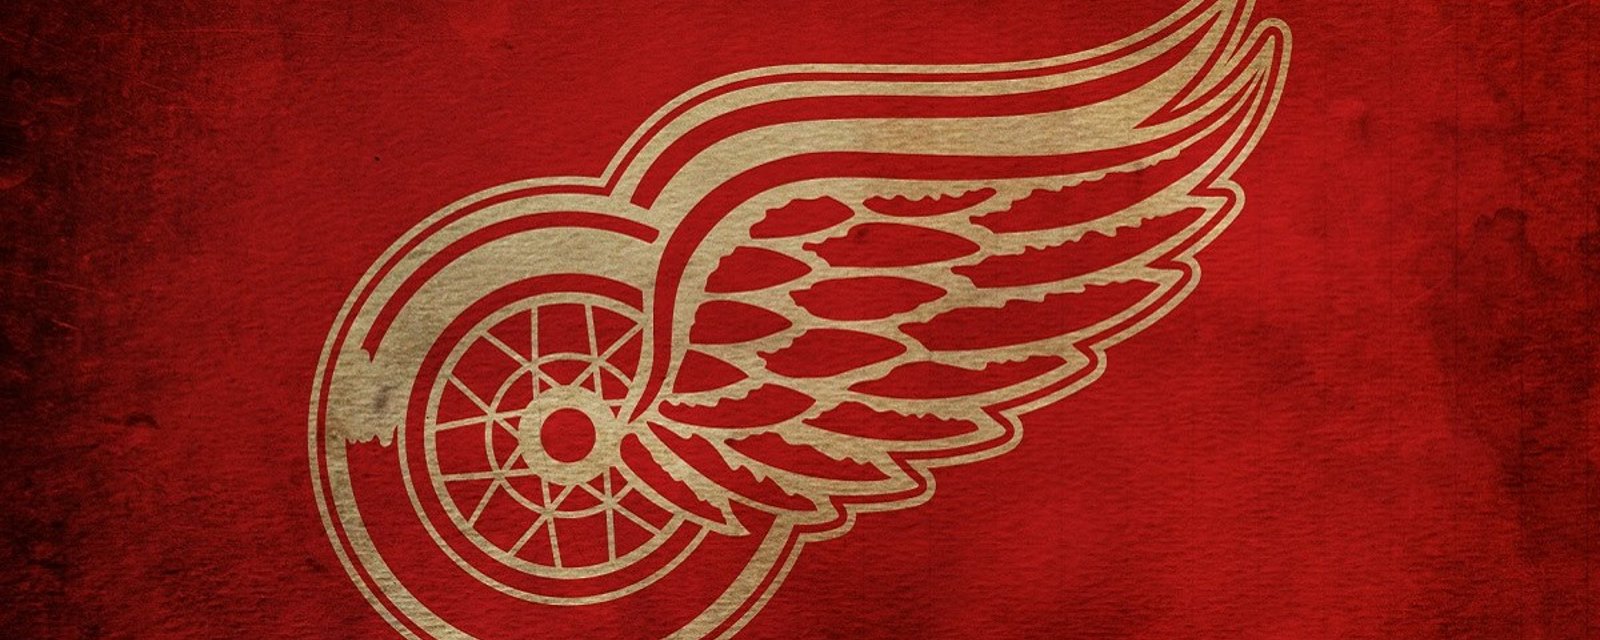 BREAKING: Red Wings' Affiliate Name Captains